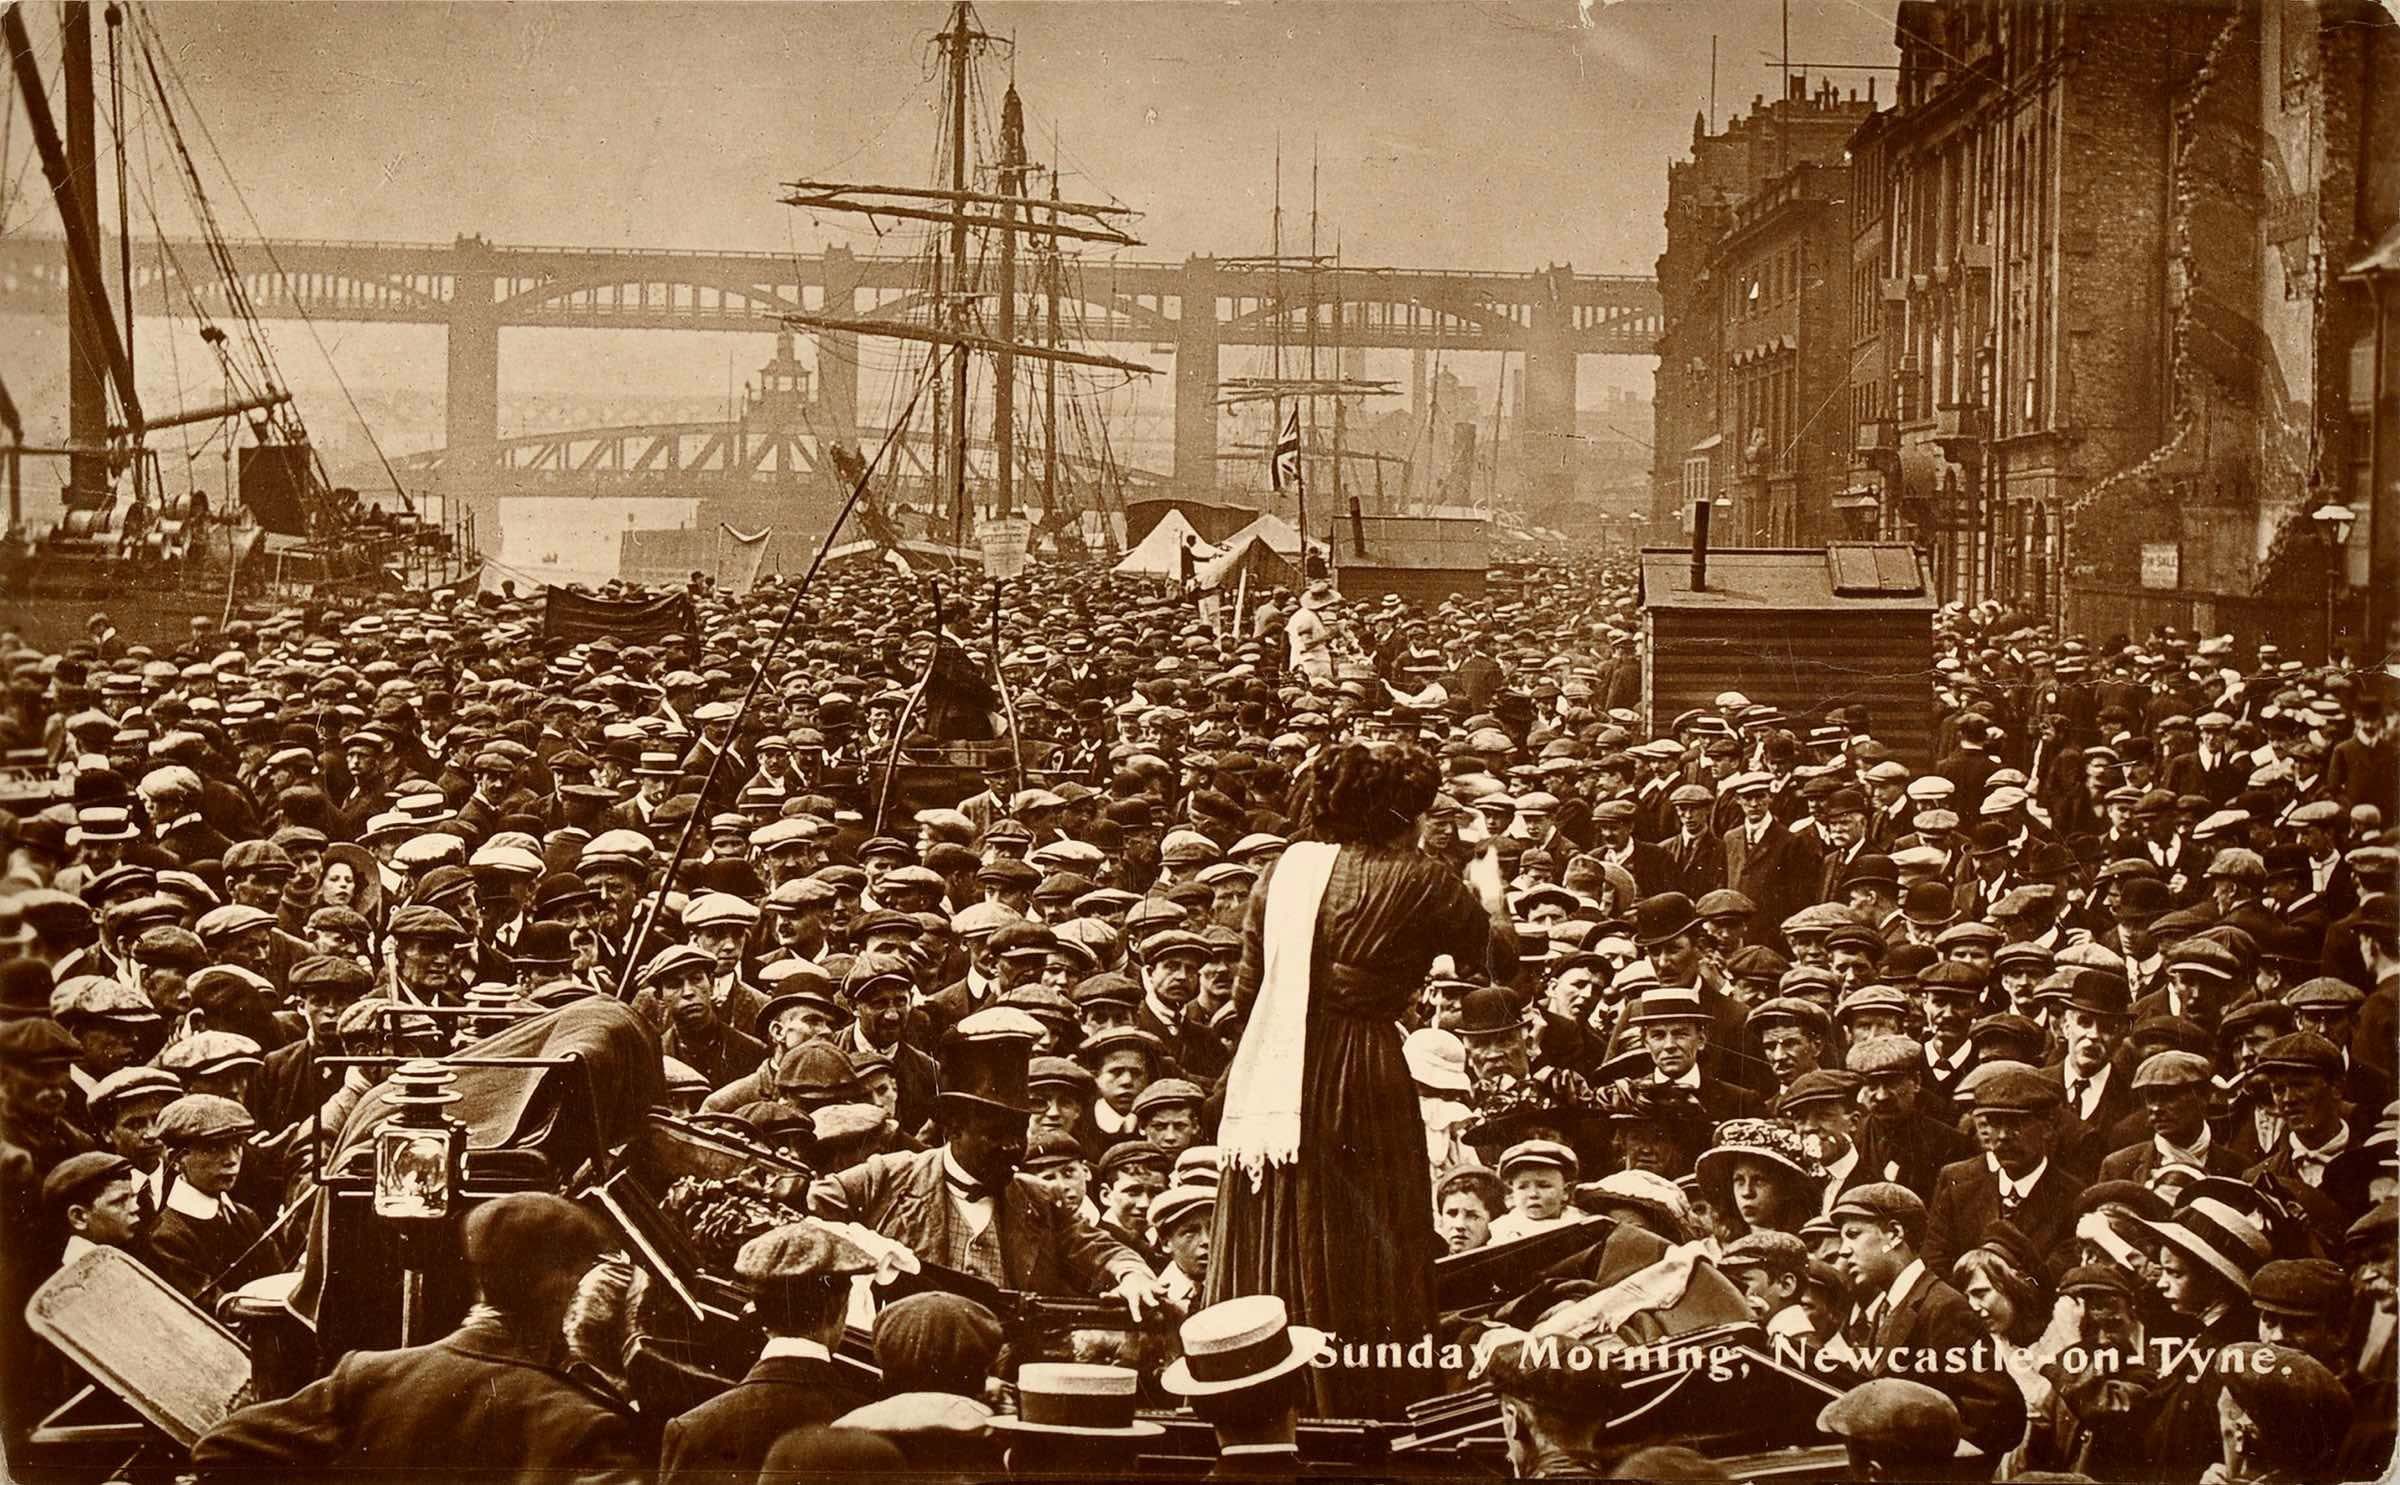 SUFFRAGETTES: Suffragette rally on the banks of the Tyne in 1914